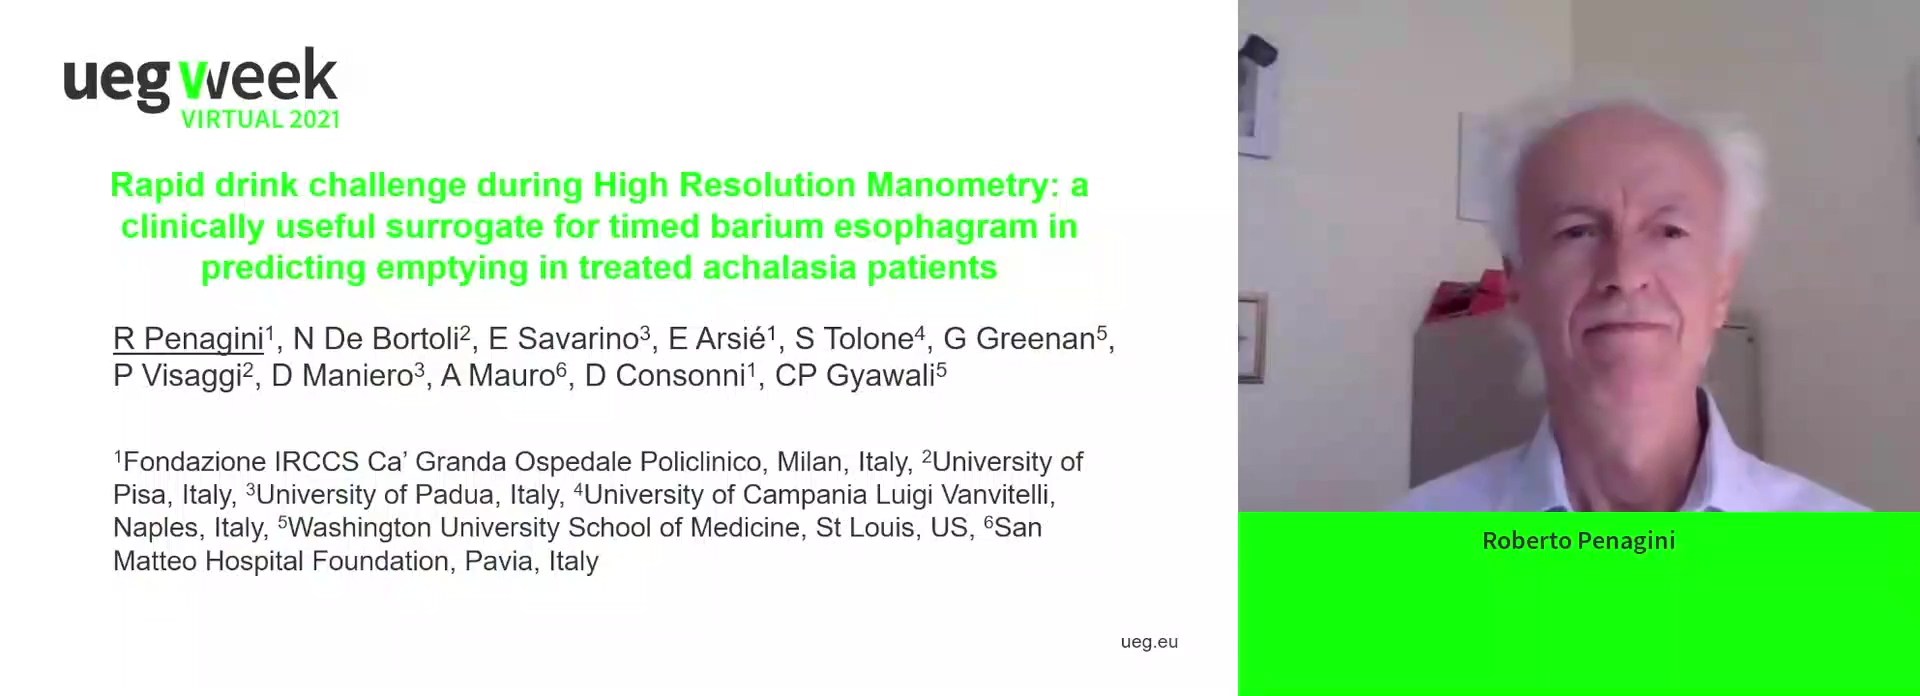 RAPID DRINK CHALLENGE DURING HIGH RESOLUTION MANOMETRY: A CLINICALLY USEFUL SURROGATE FOR TIMED BARIUM EOPHAGOGRAM IN PREDICTING ESOPHAGEAL EMPTYING IN TREATED ACHALASIA PATIENTS